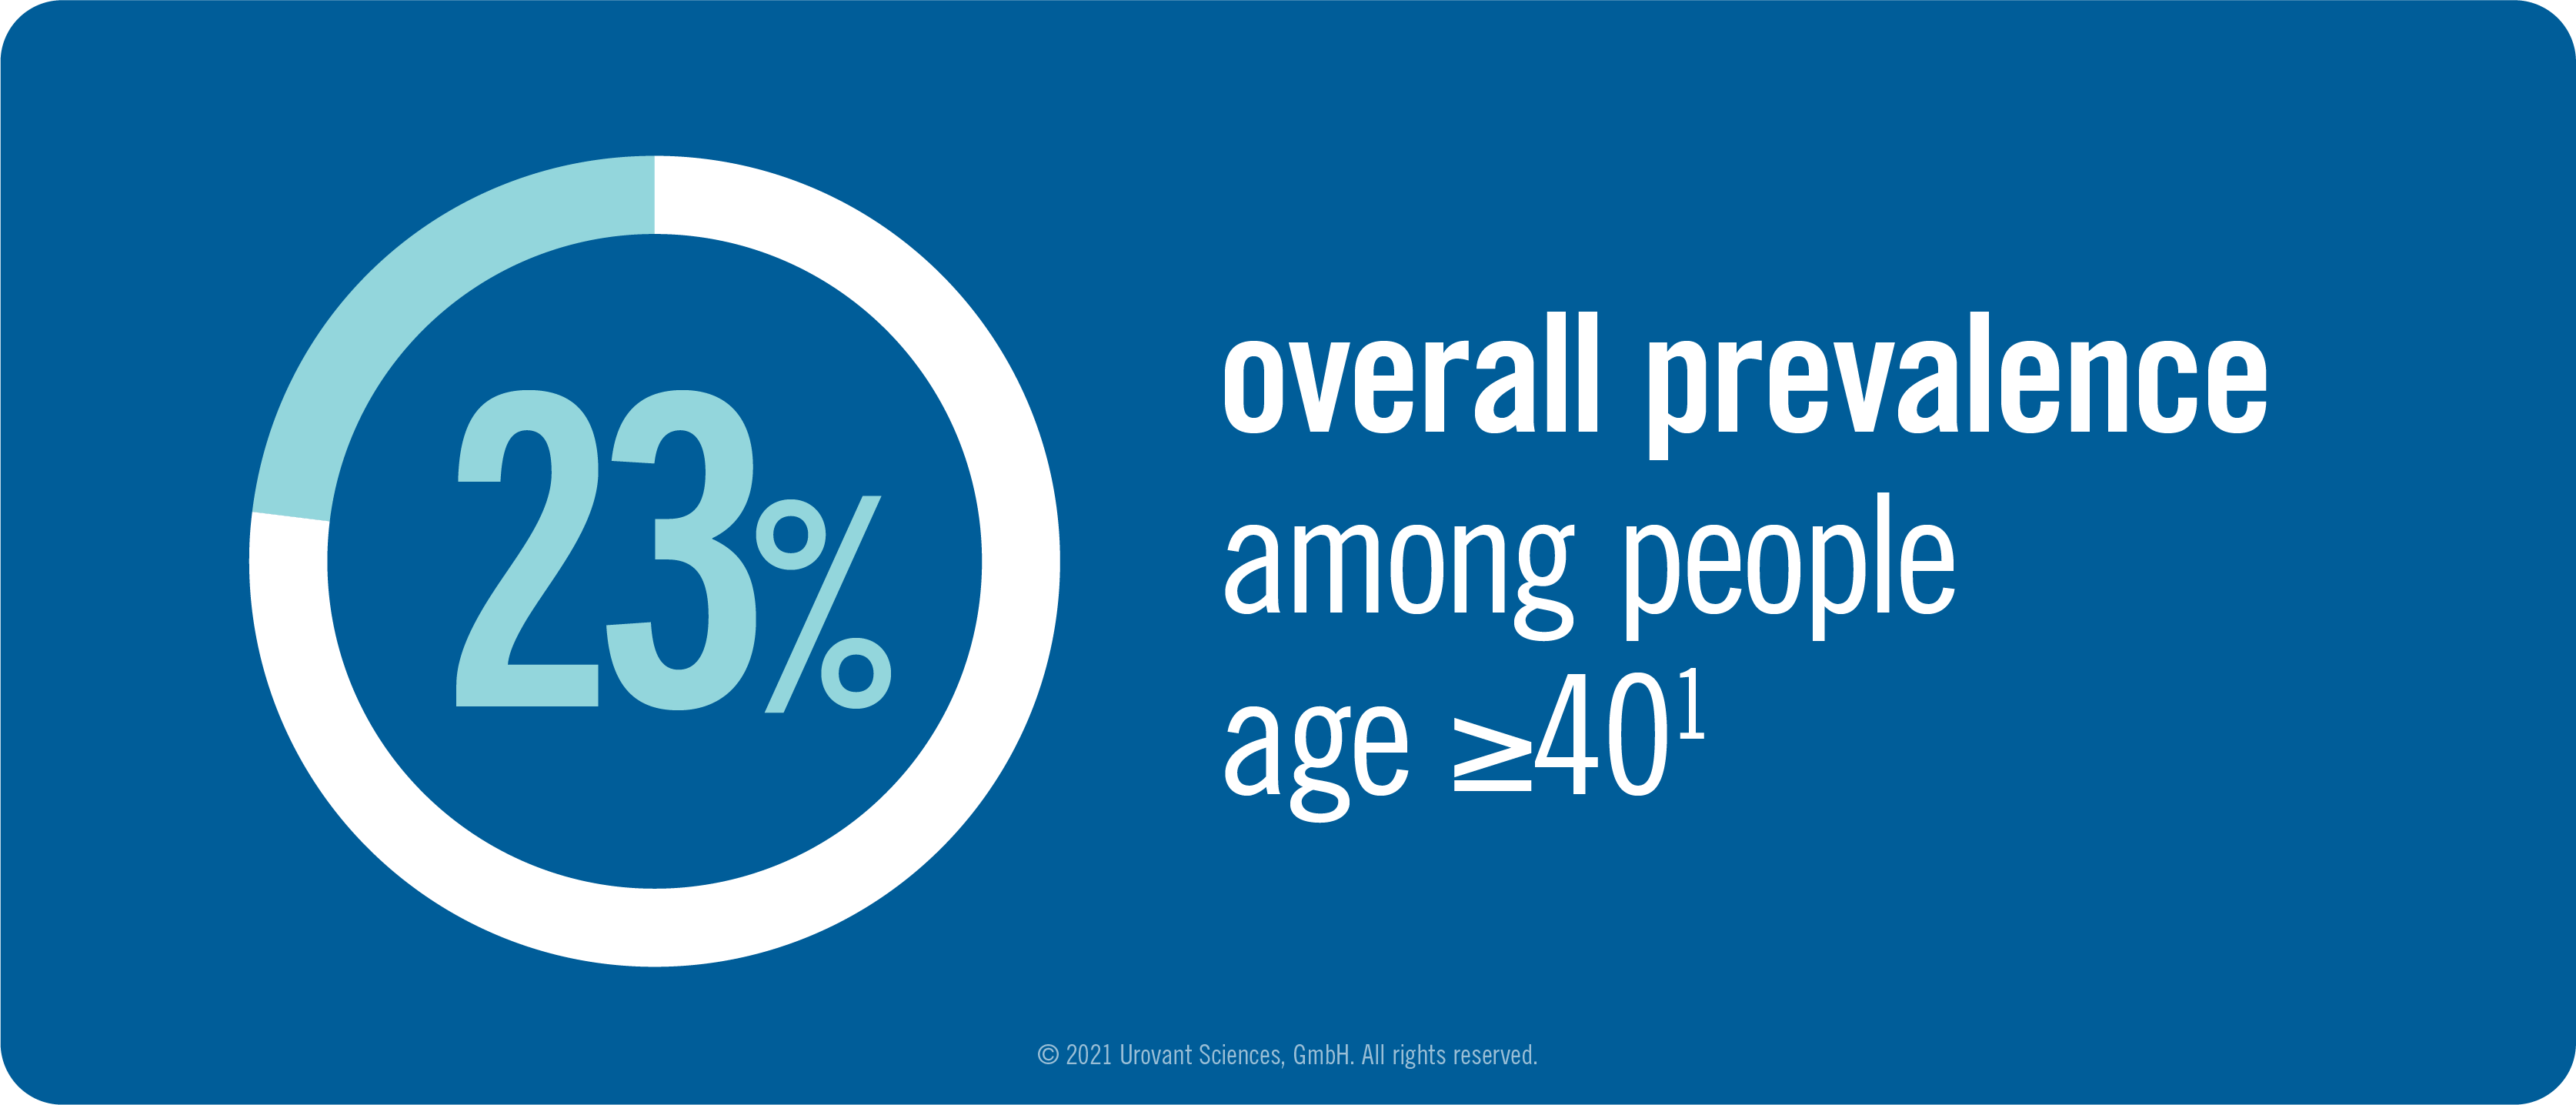 Infographic of 23% overall prevalence among people age 40 and over